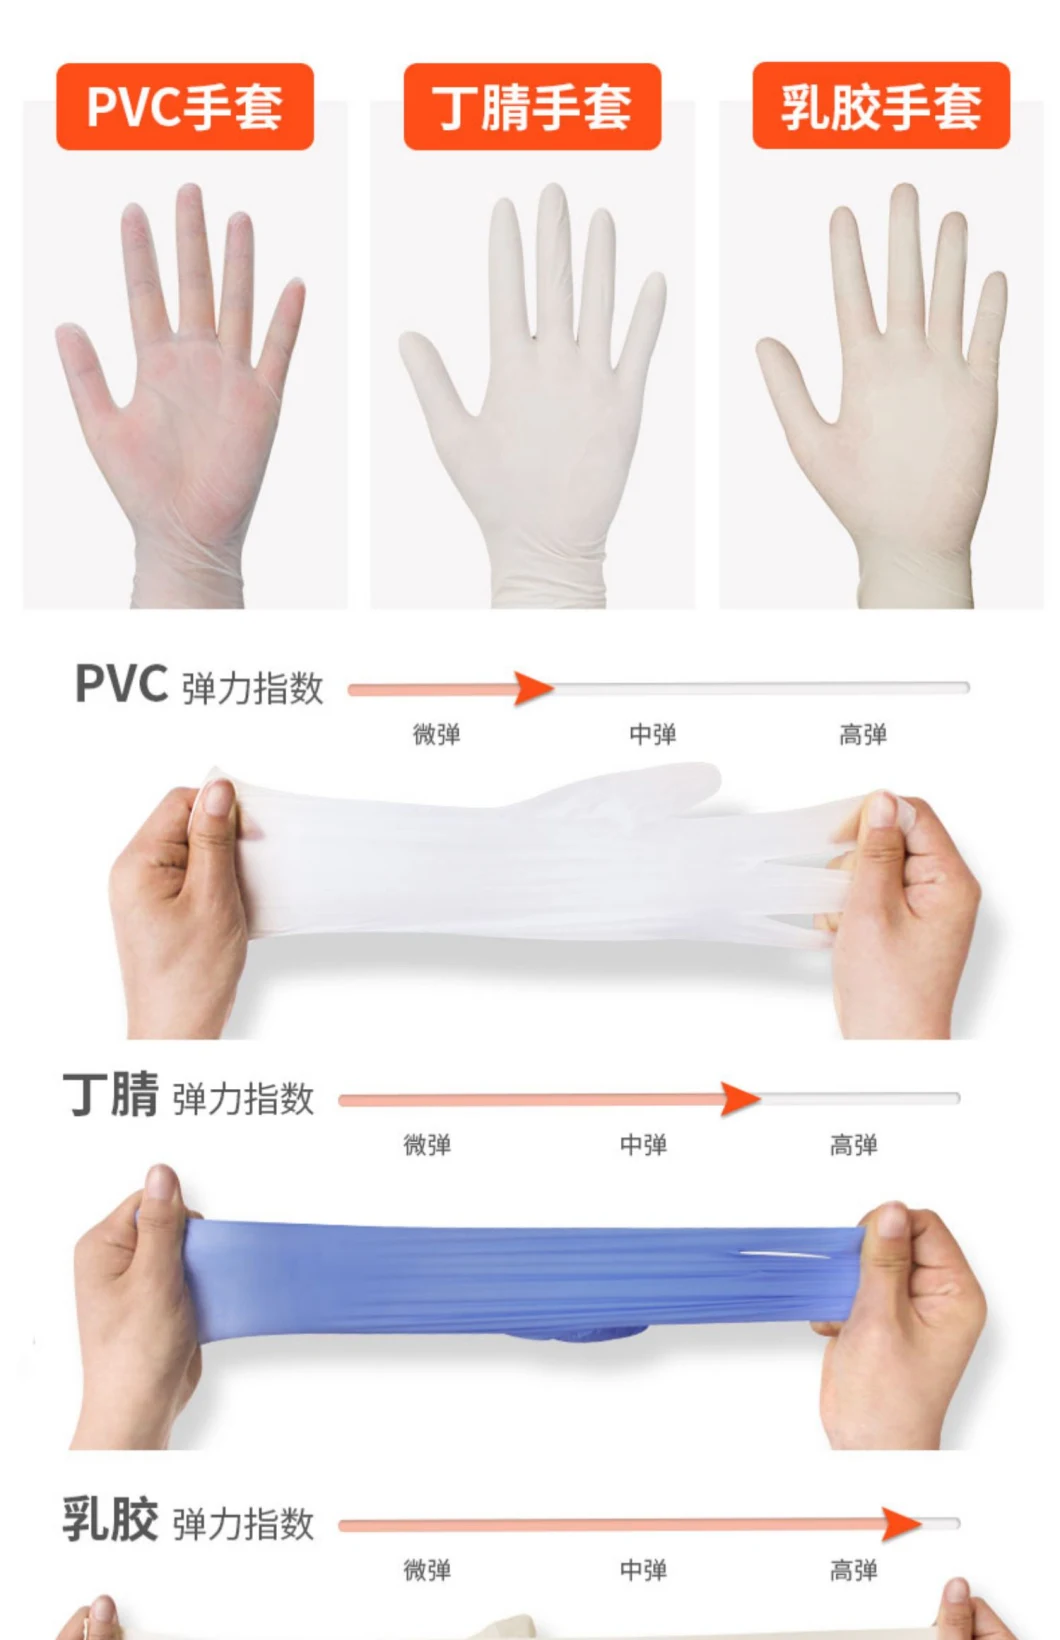 Anti-Puncture Nitrile Gloves Wear-Resistant Oil-Resistant Nitrile Gloves Non-Stick Latex Gloves